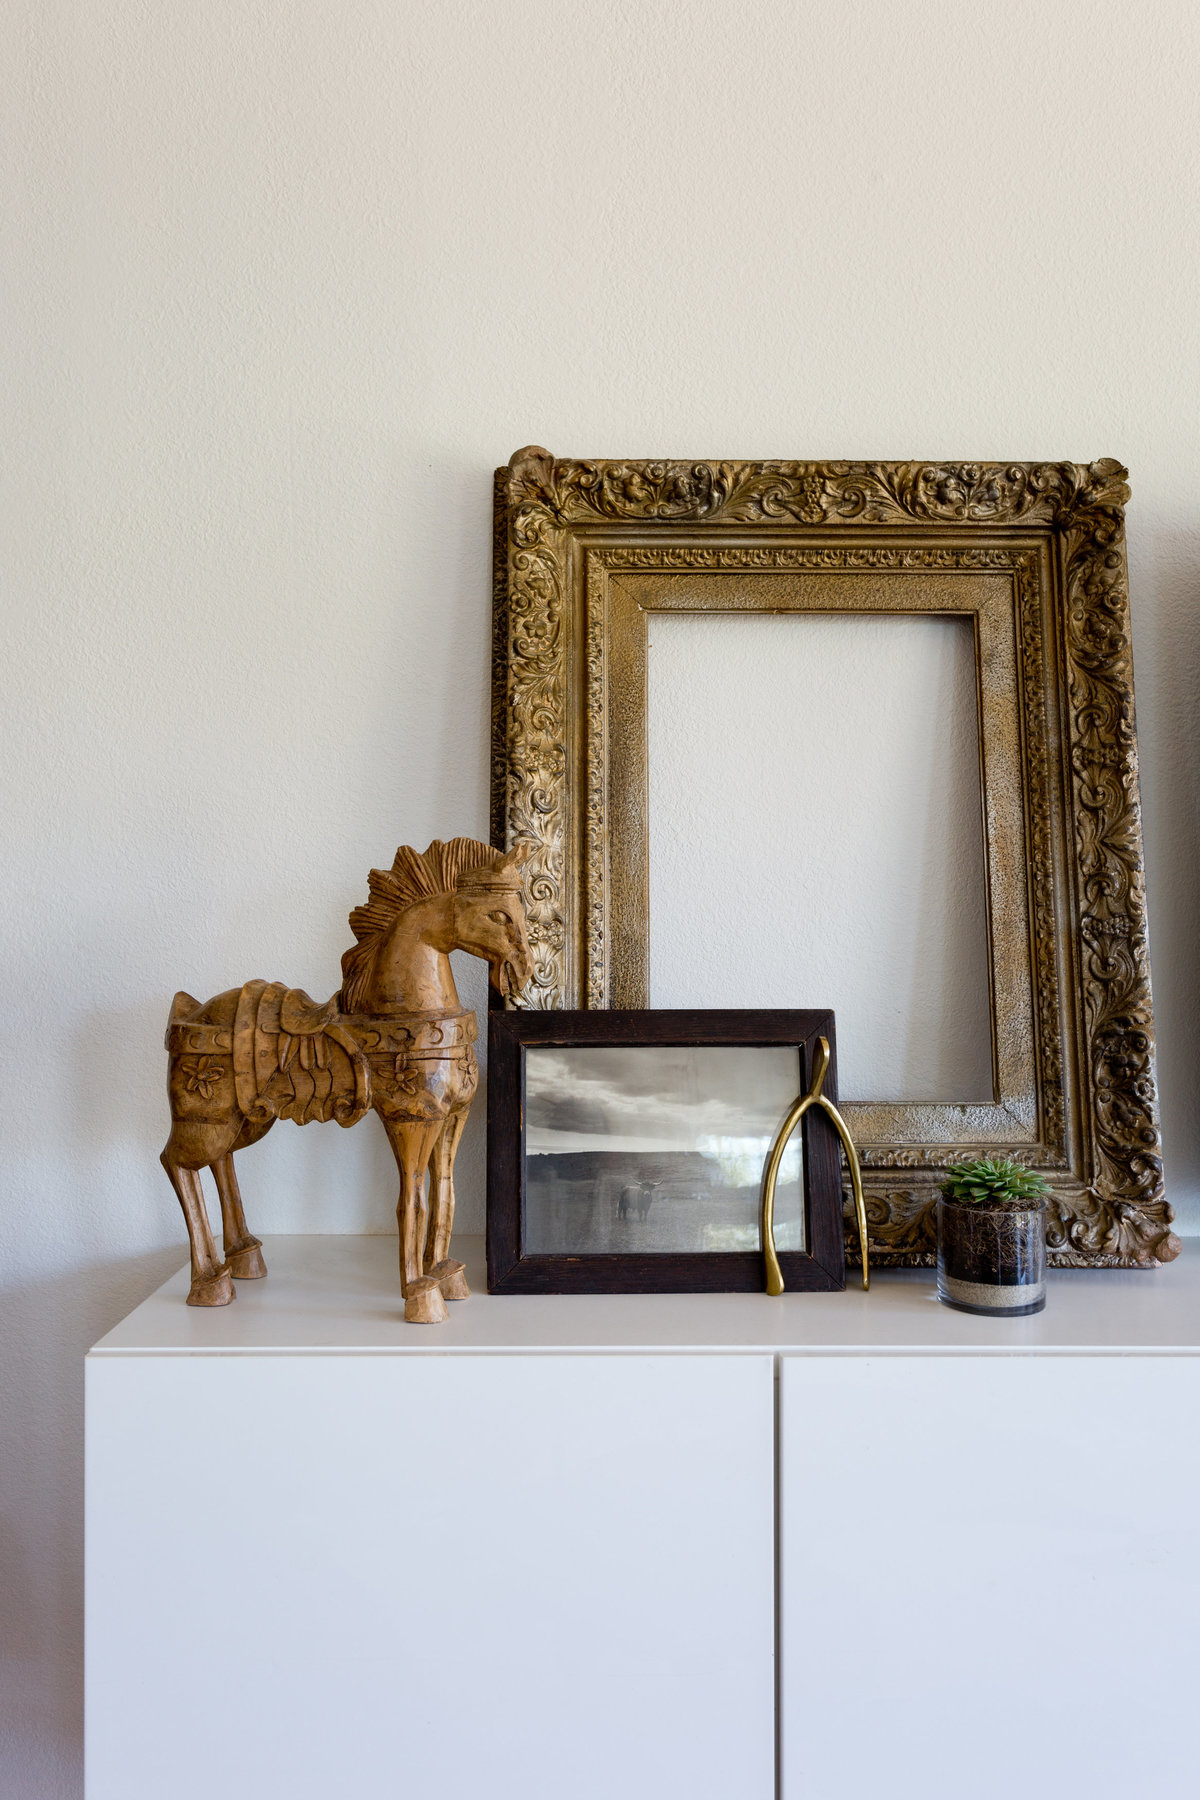 Styling of media cabinet with wooden horse, vintage gold frame, black and white photo of short horn cow, gold wishbone, and succulent